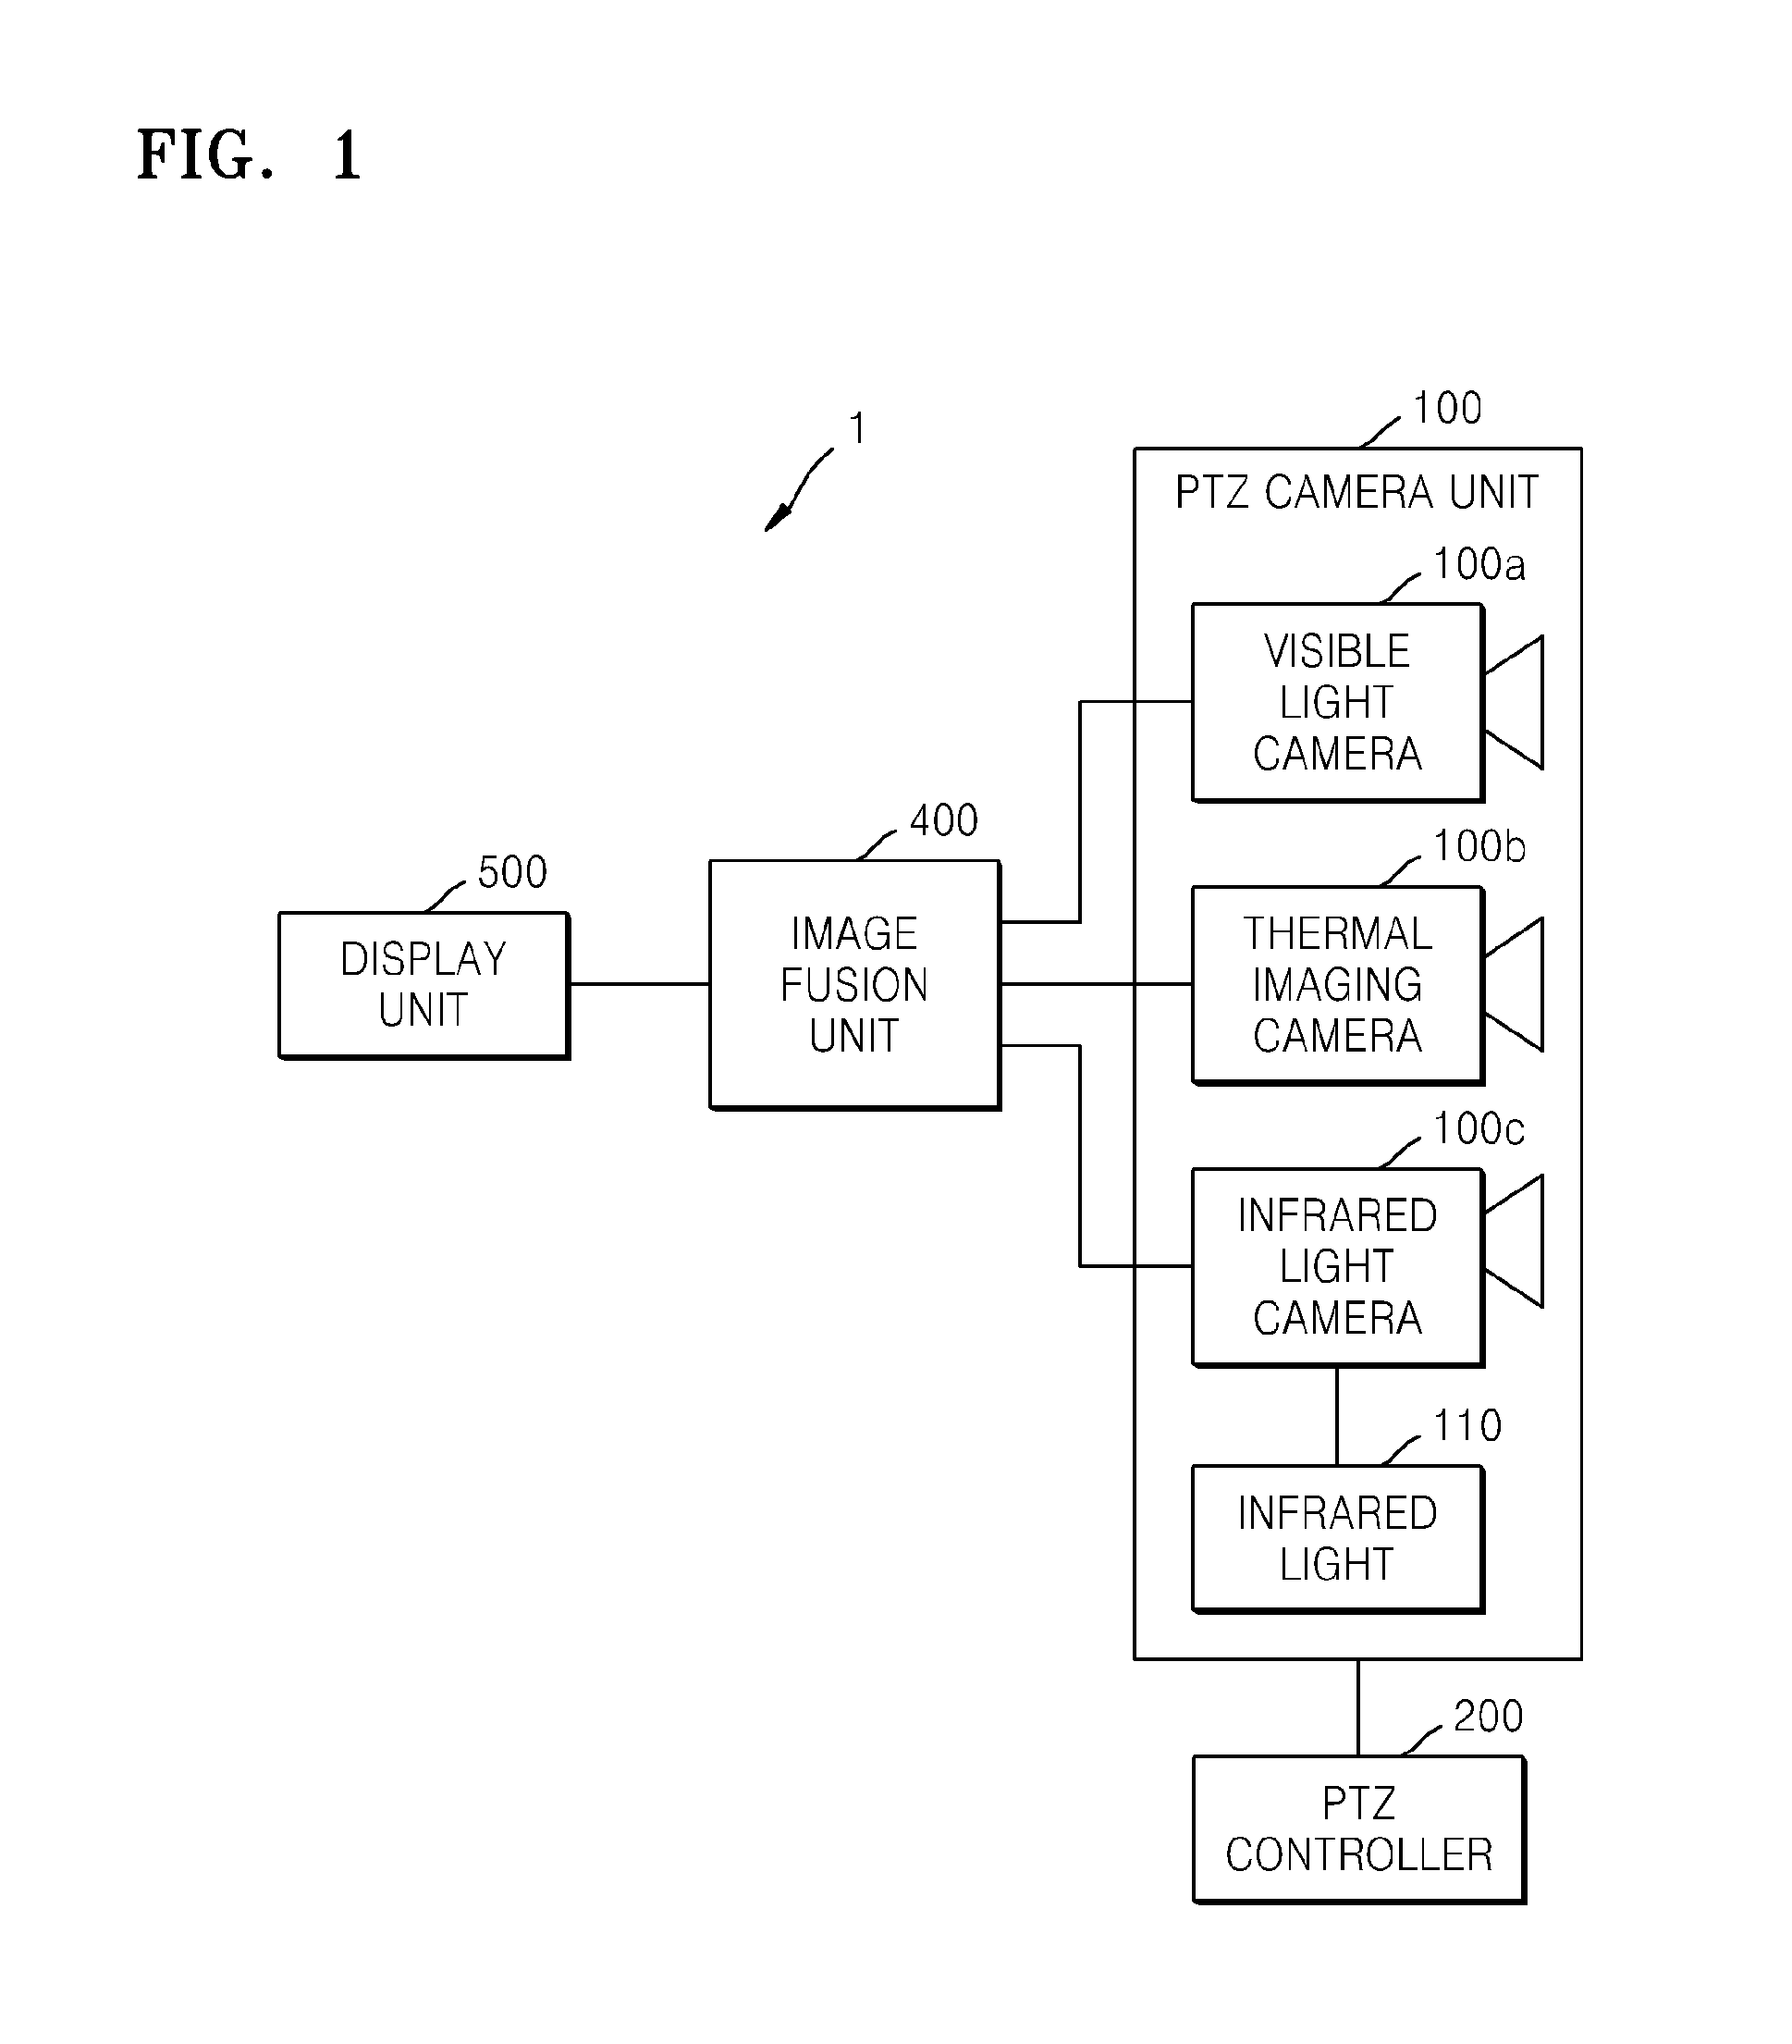 Image fusion system and method